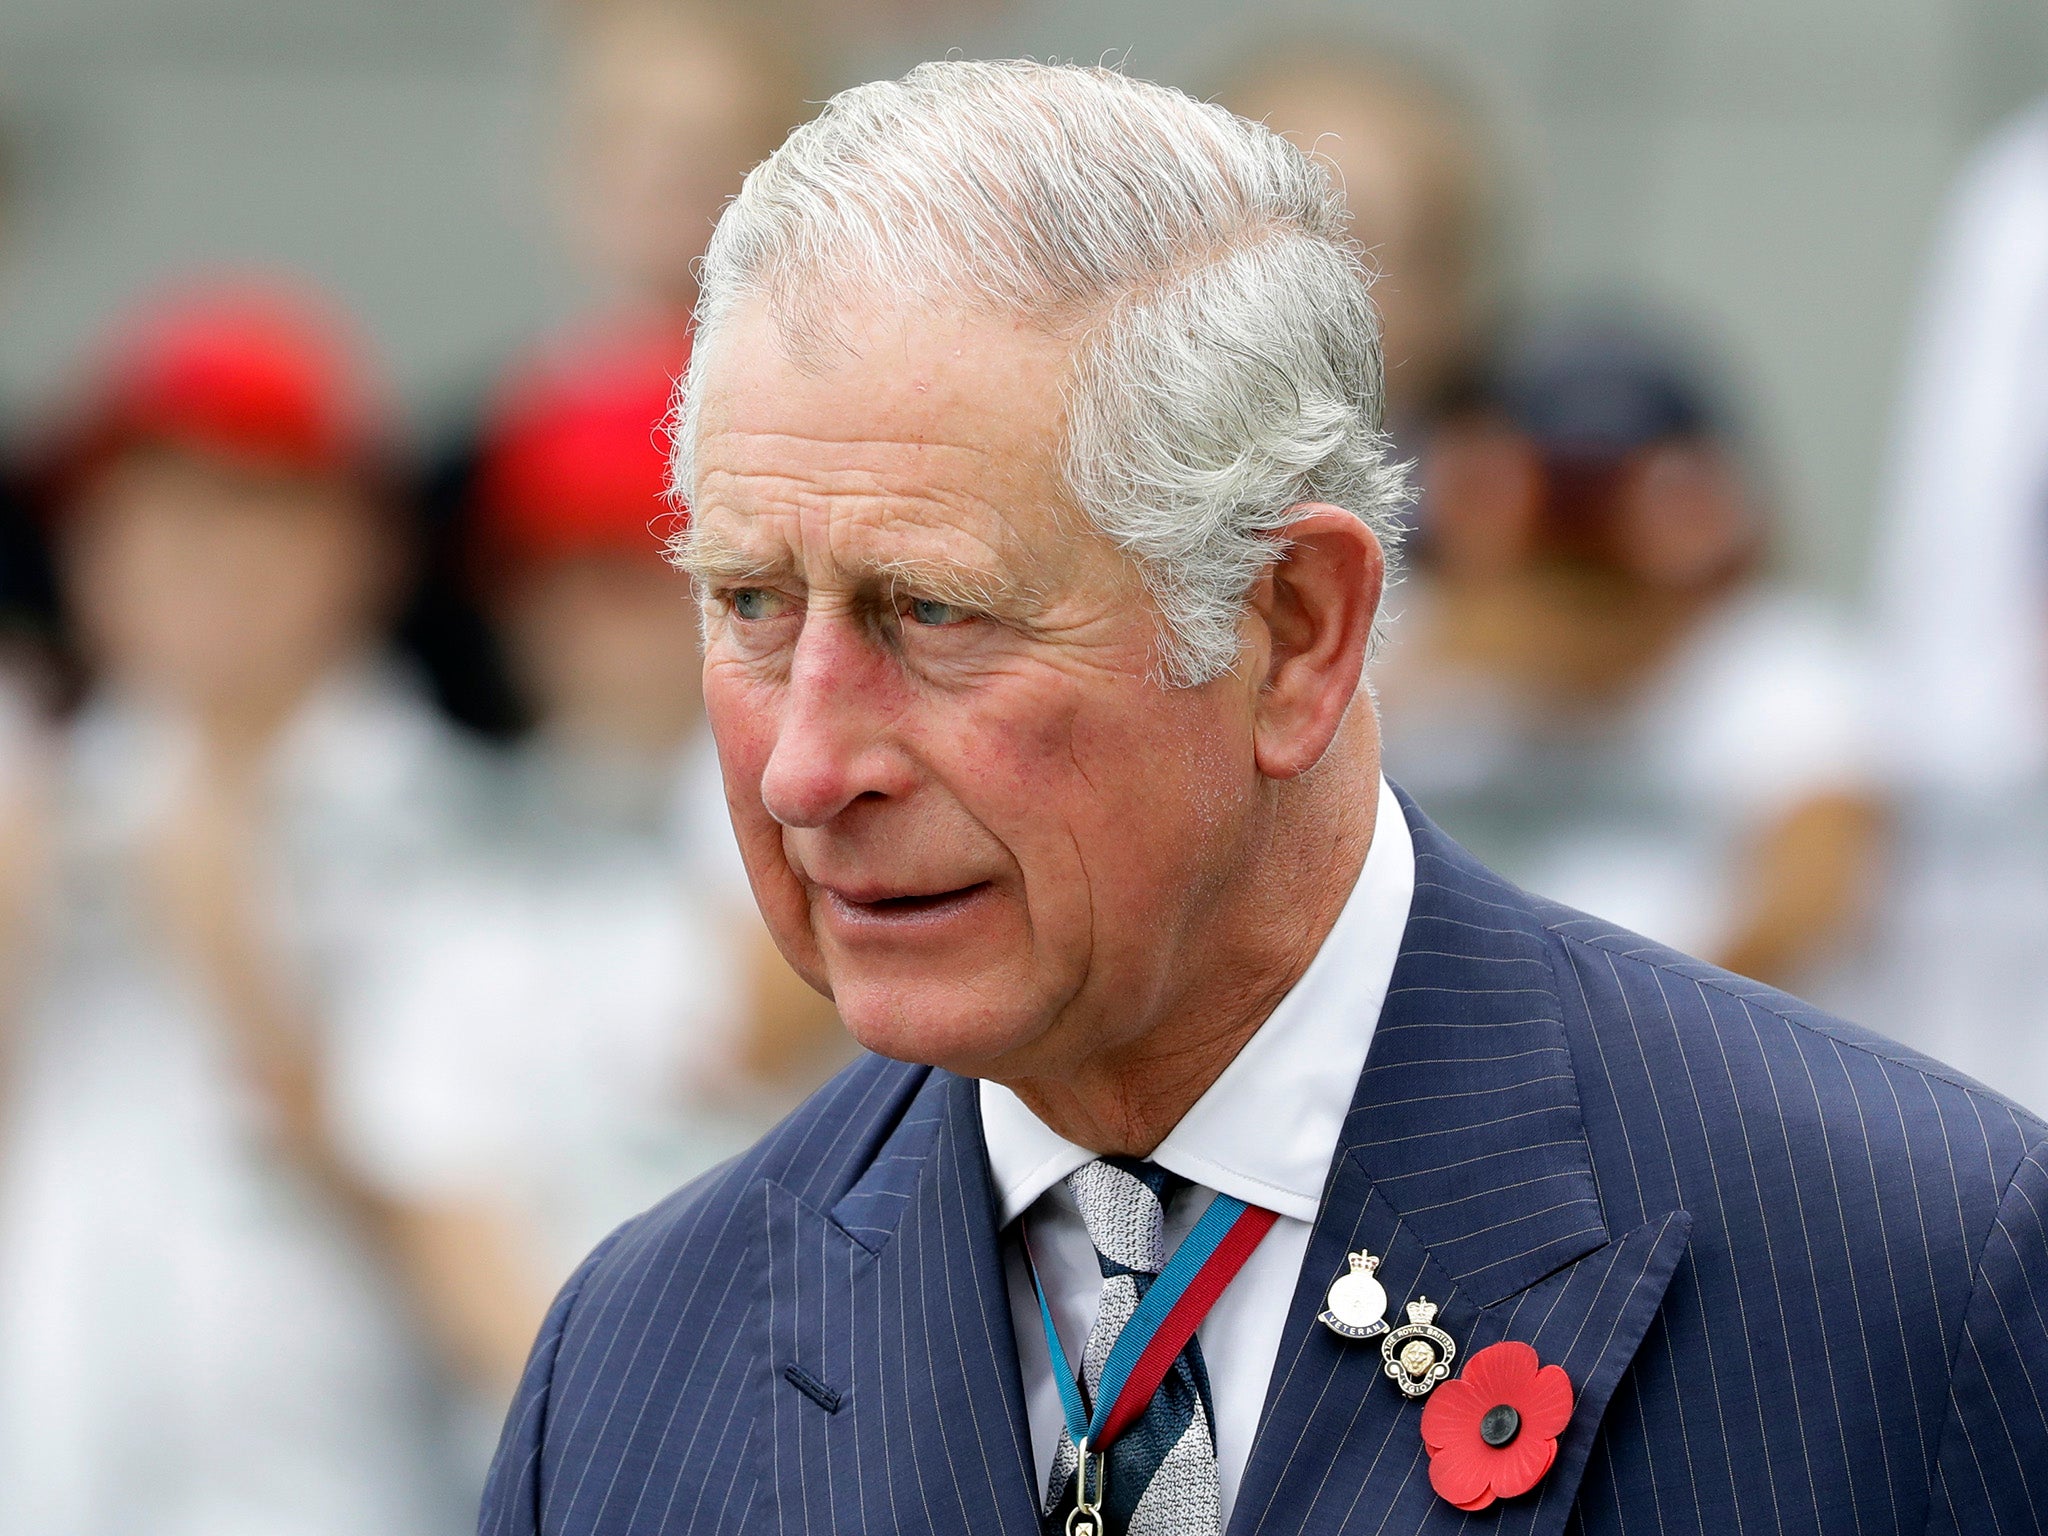 Board members of a company the Prince of Wales invested in were reportedly sworn to secrecy over his involvement